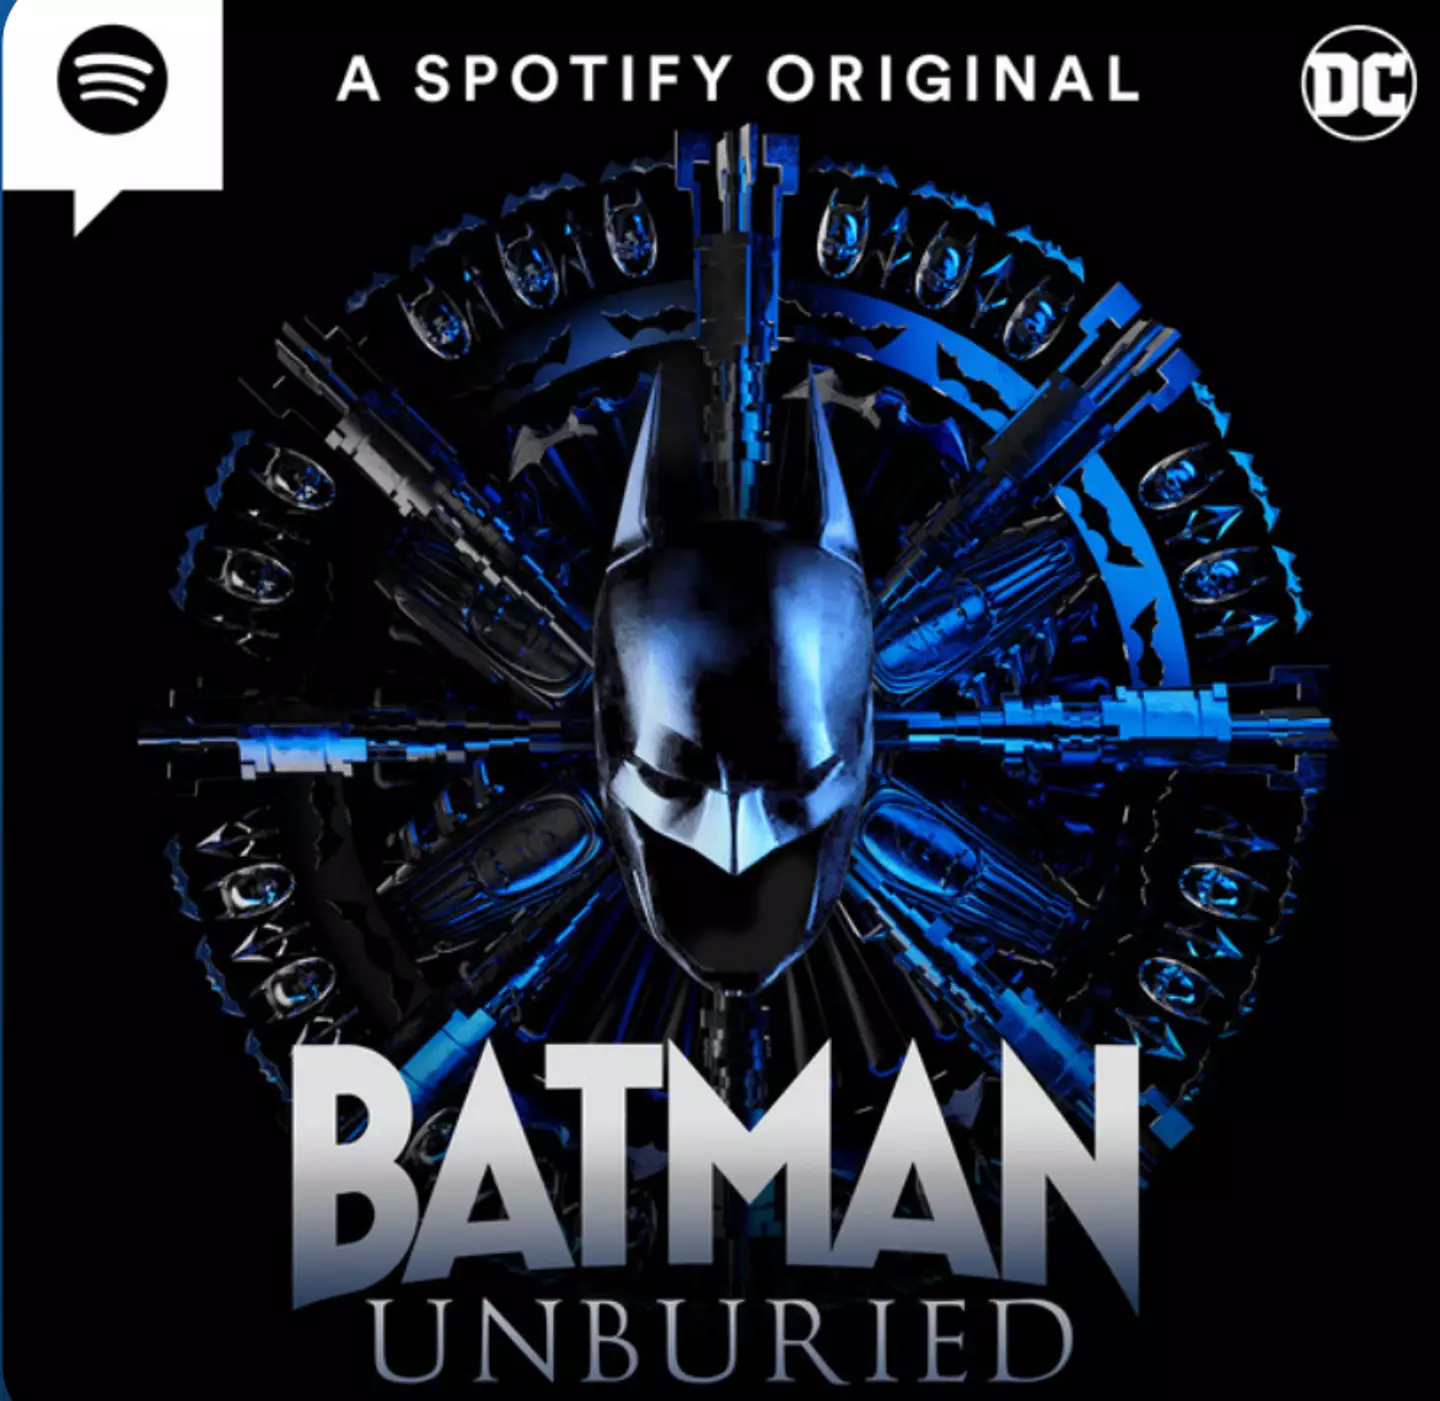 Batman Unburied has now overtaken The Joe Rogan Experience on Spotify's US Podcast Charts.